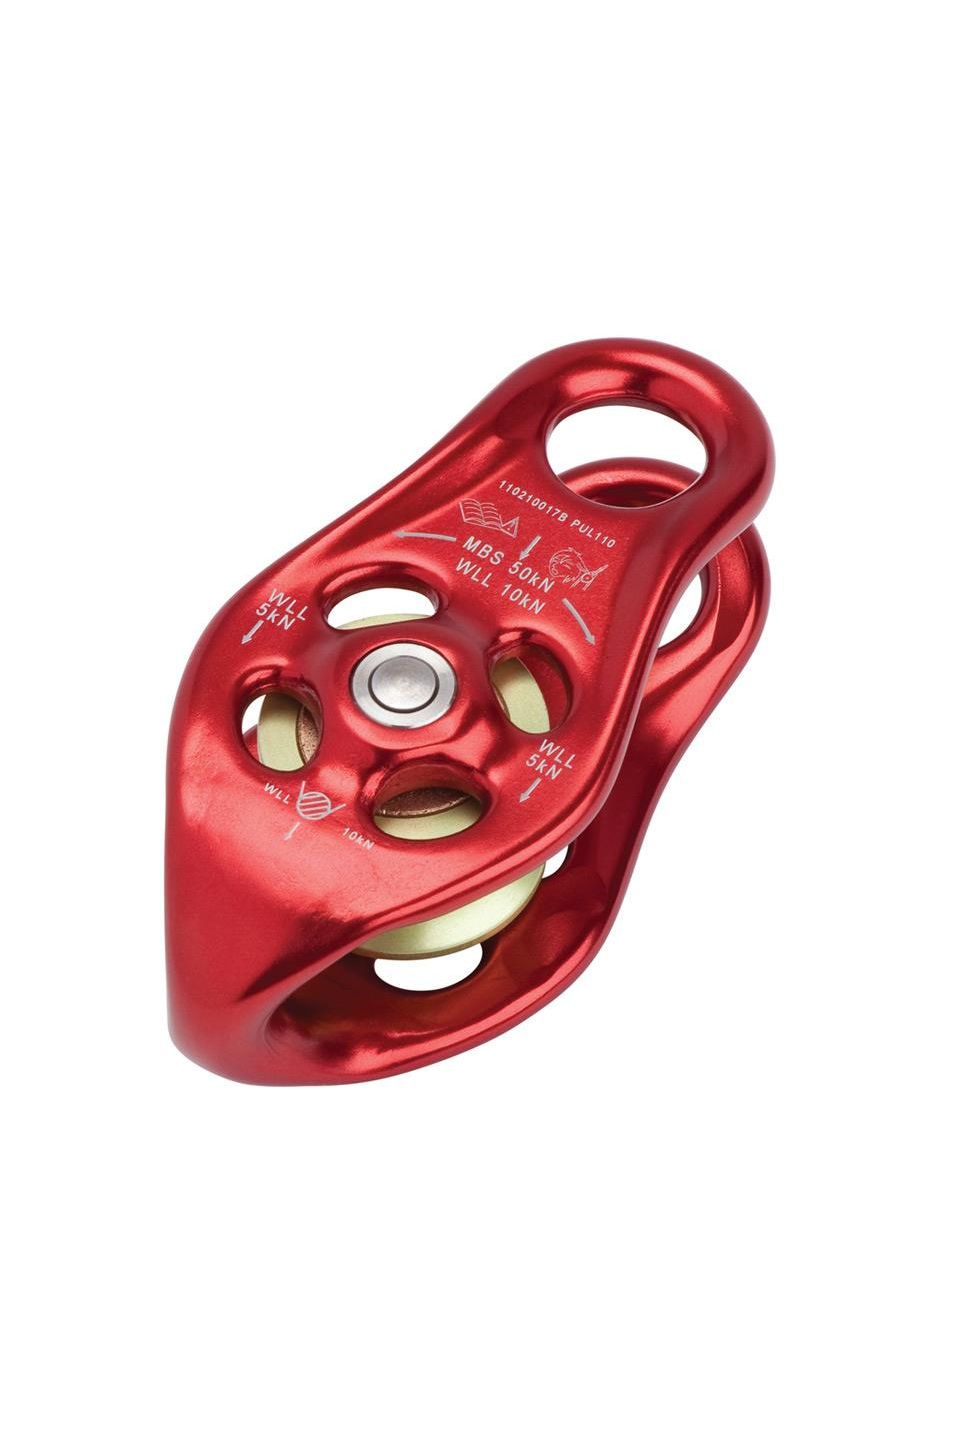 DMM Pinto Pulley - Anton's Timber